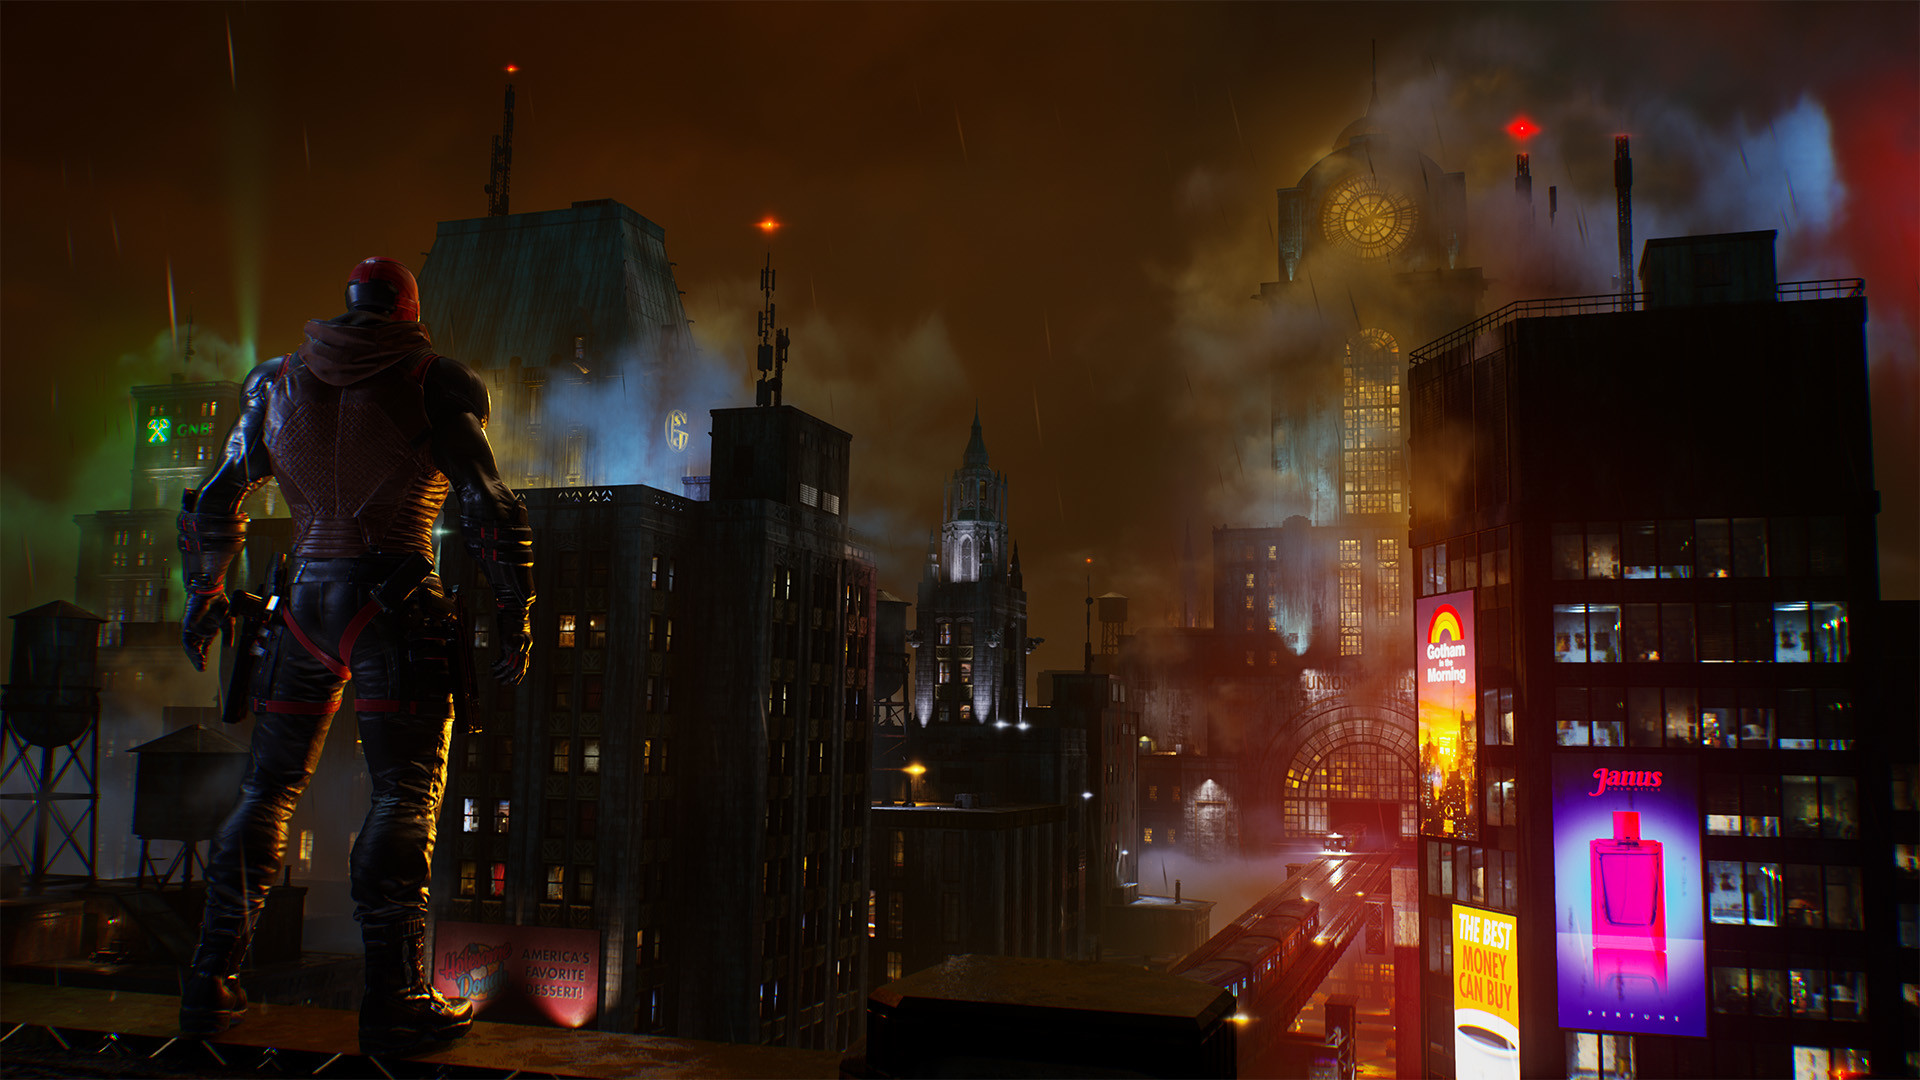 Gotham Knights' recent gameplay footage left some feeling disappointment